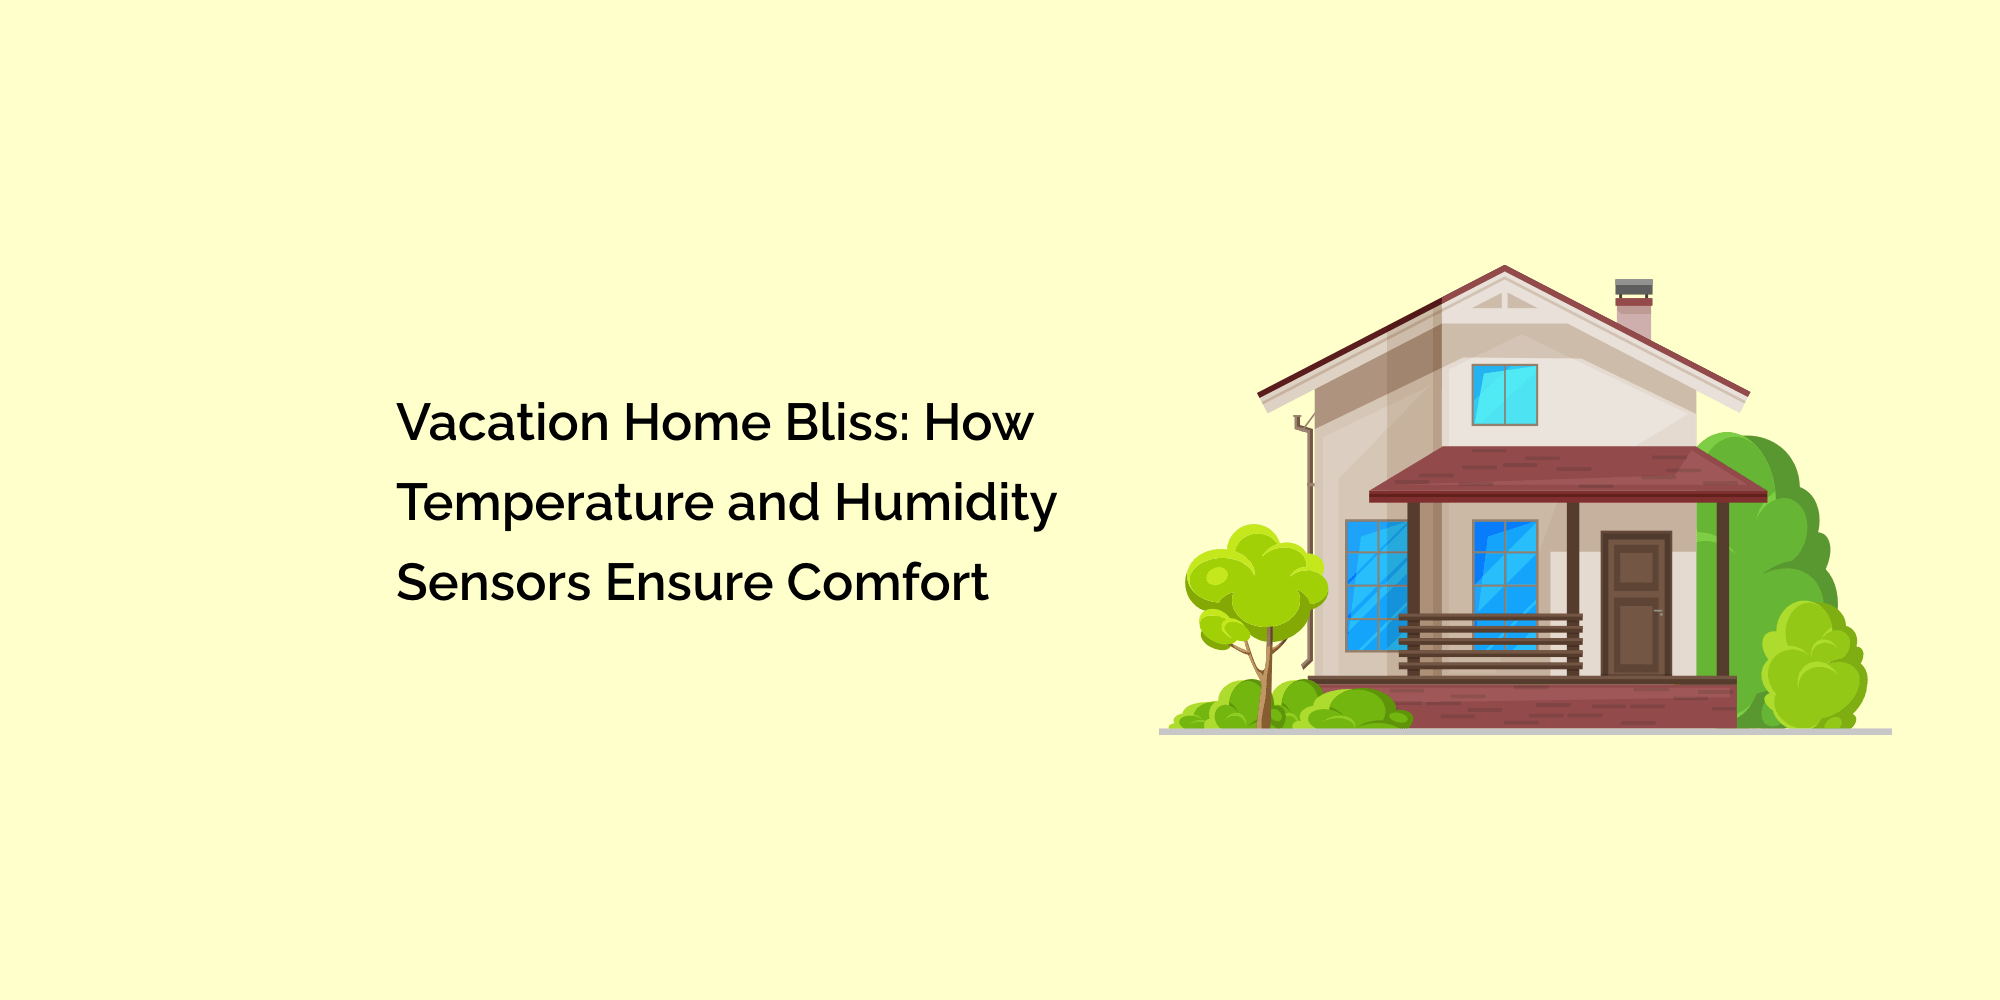 Vacation Home Bliss: How Temperature and Humidity Sensors Ensure Comfort